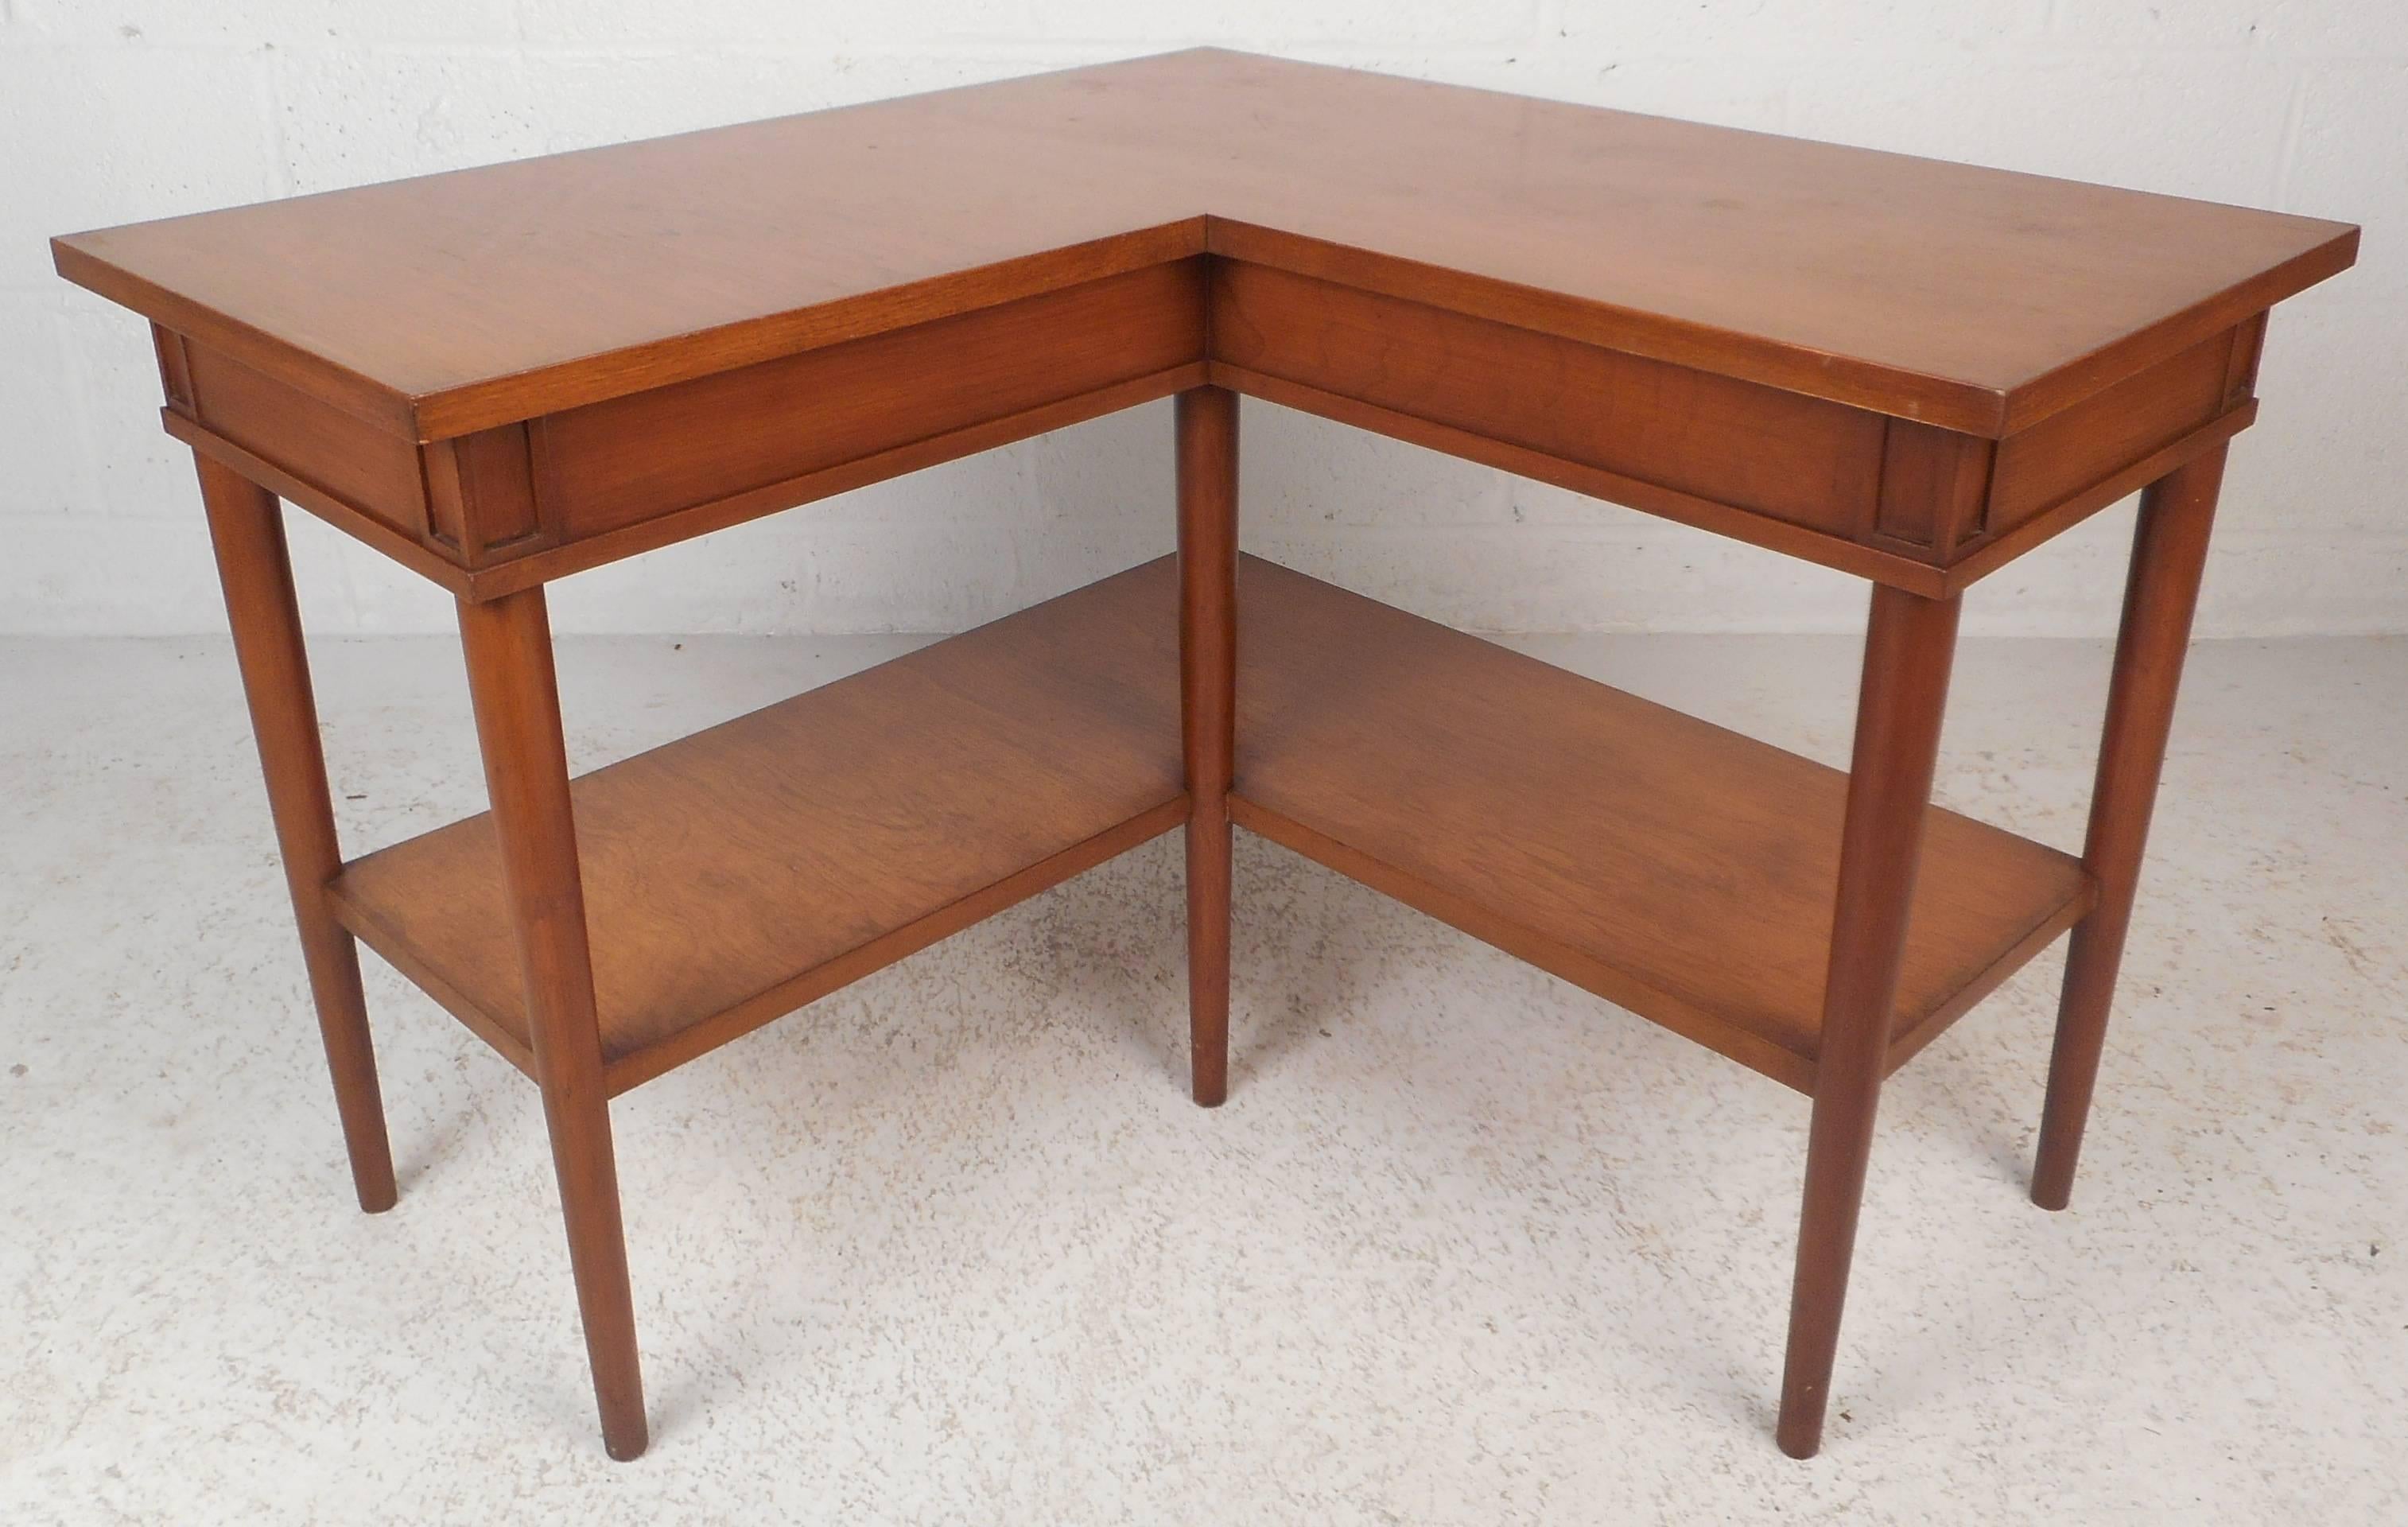 This versatile vintage modern piece can be used as a shelf, coffee table, or corner table. Sleek design with tapered legs and two tiers for added convenience. Beautiful walnut wood grain and clean lines add to the Mid-Century appeal. This unique